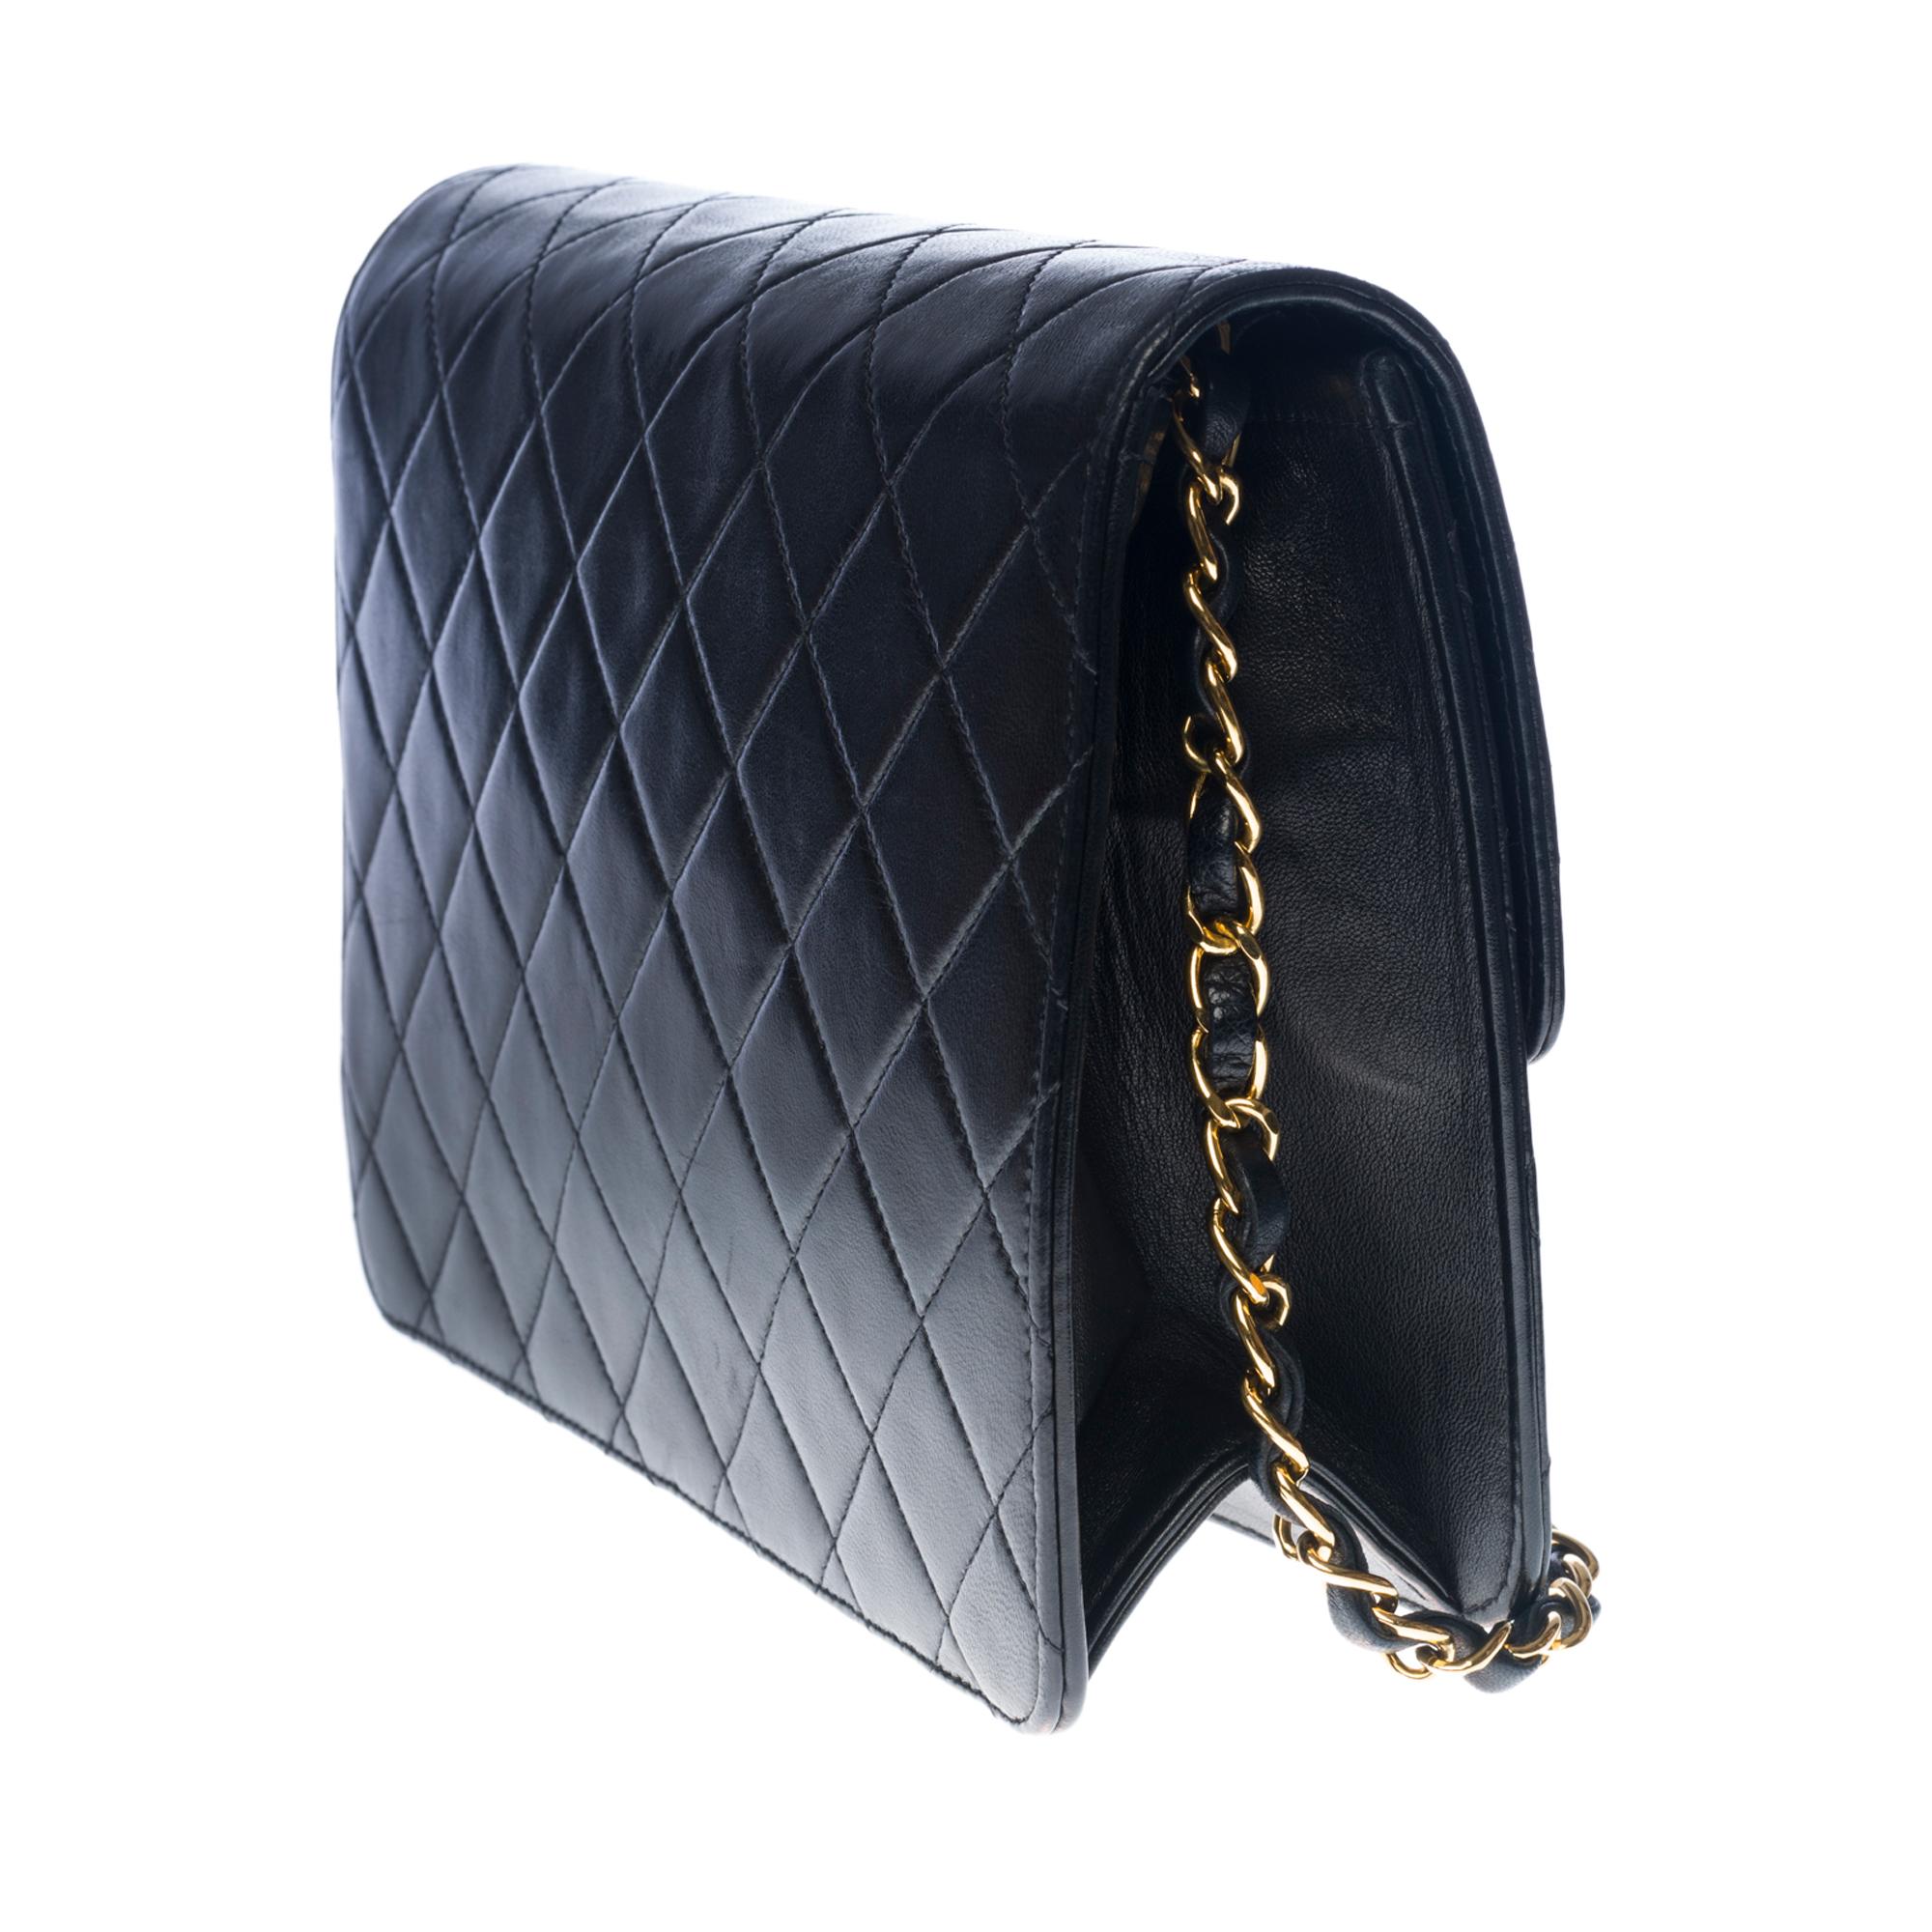 Women's Amazing Chanel Classic Flap shoulder bag in black quilted lambskin, GHW